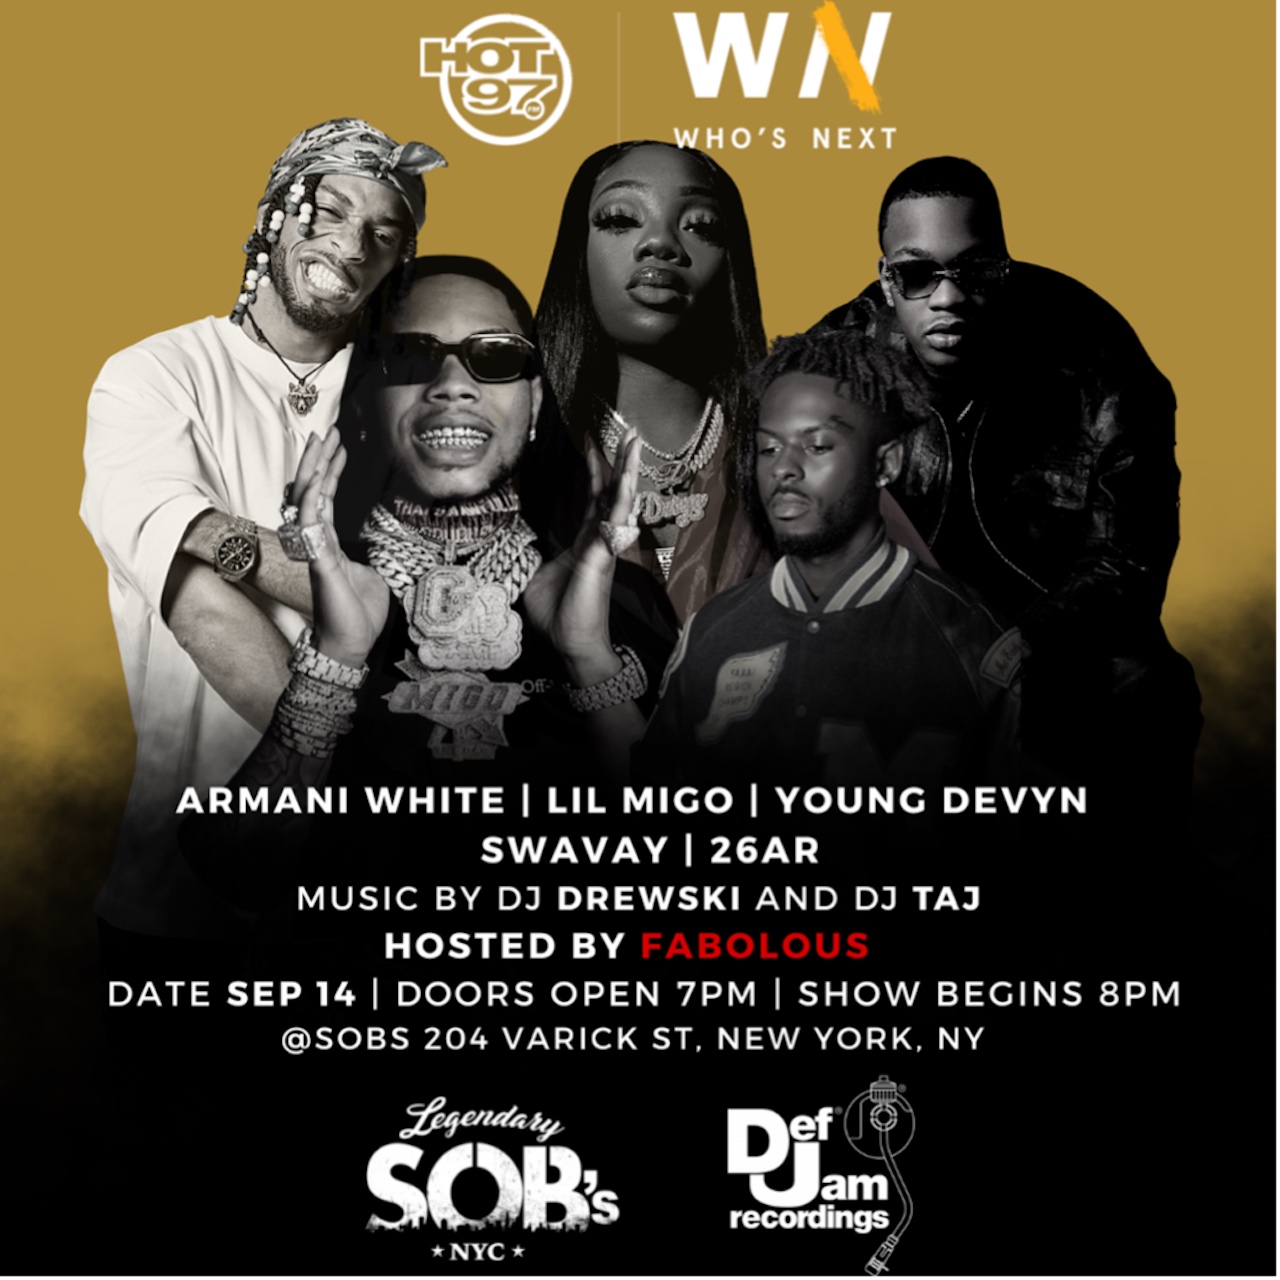 Def Jam And 4th & B‘Way Team Up With Hot 97 For ‘Who’s Next’